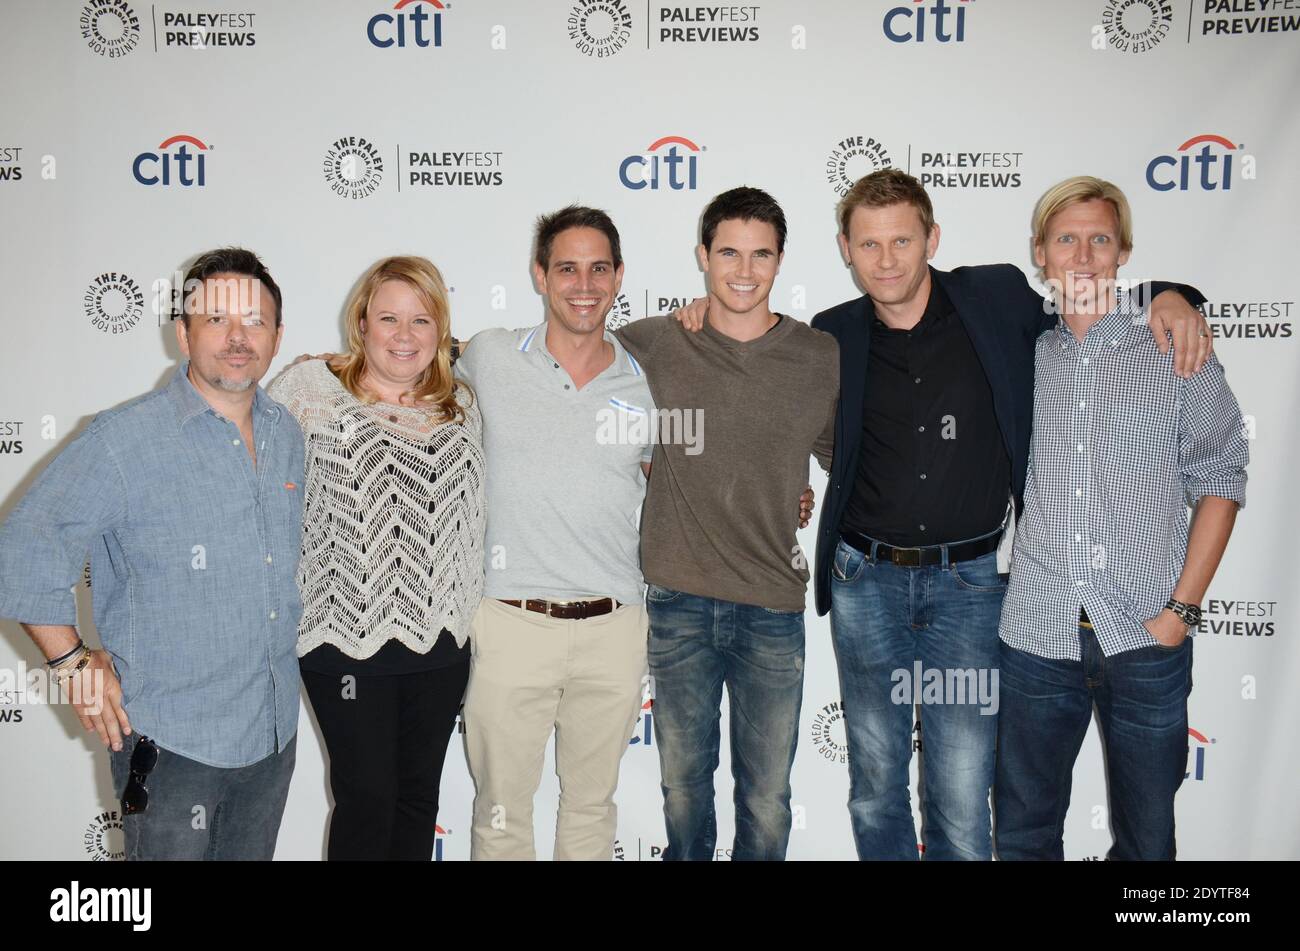 Danny Cannon, Julie Plec, Greg Berlanti, Robbie Amell, Mark Pellegrino and Phil Klemmer arrive for 2013 PaleyFestPreviews: Fall TV with The CW 'The Tomorrow People' held at Paley Center in Beverly Hills, Los Angeles, CA, USA on September 7, 2013. Photo by Tonya Wise/ABACAPRESS.COM Stock Photo